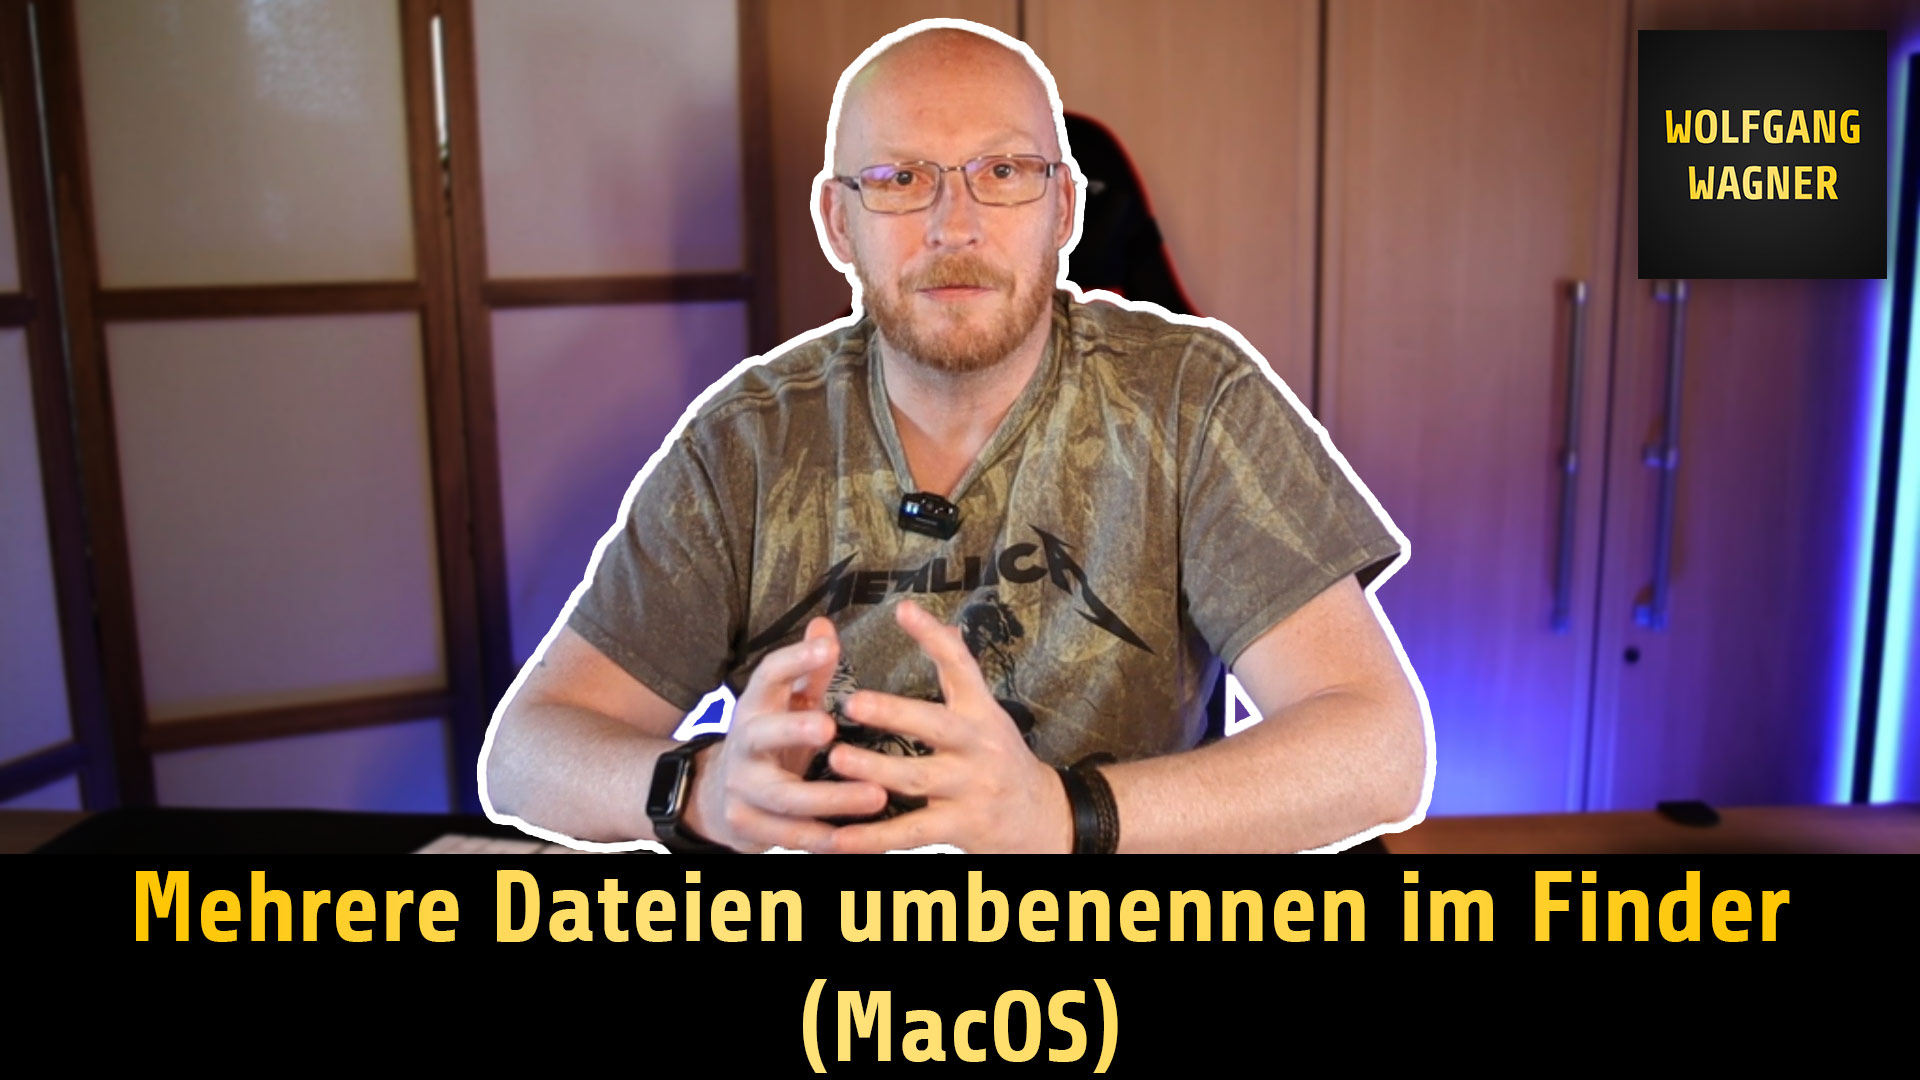 You are currently viewing Mehrere Dateien umbenennen im Finder (MacOS)